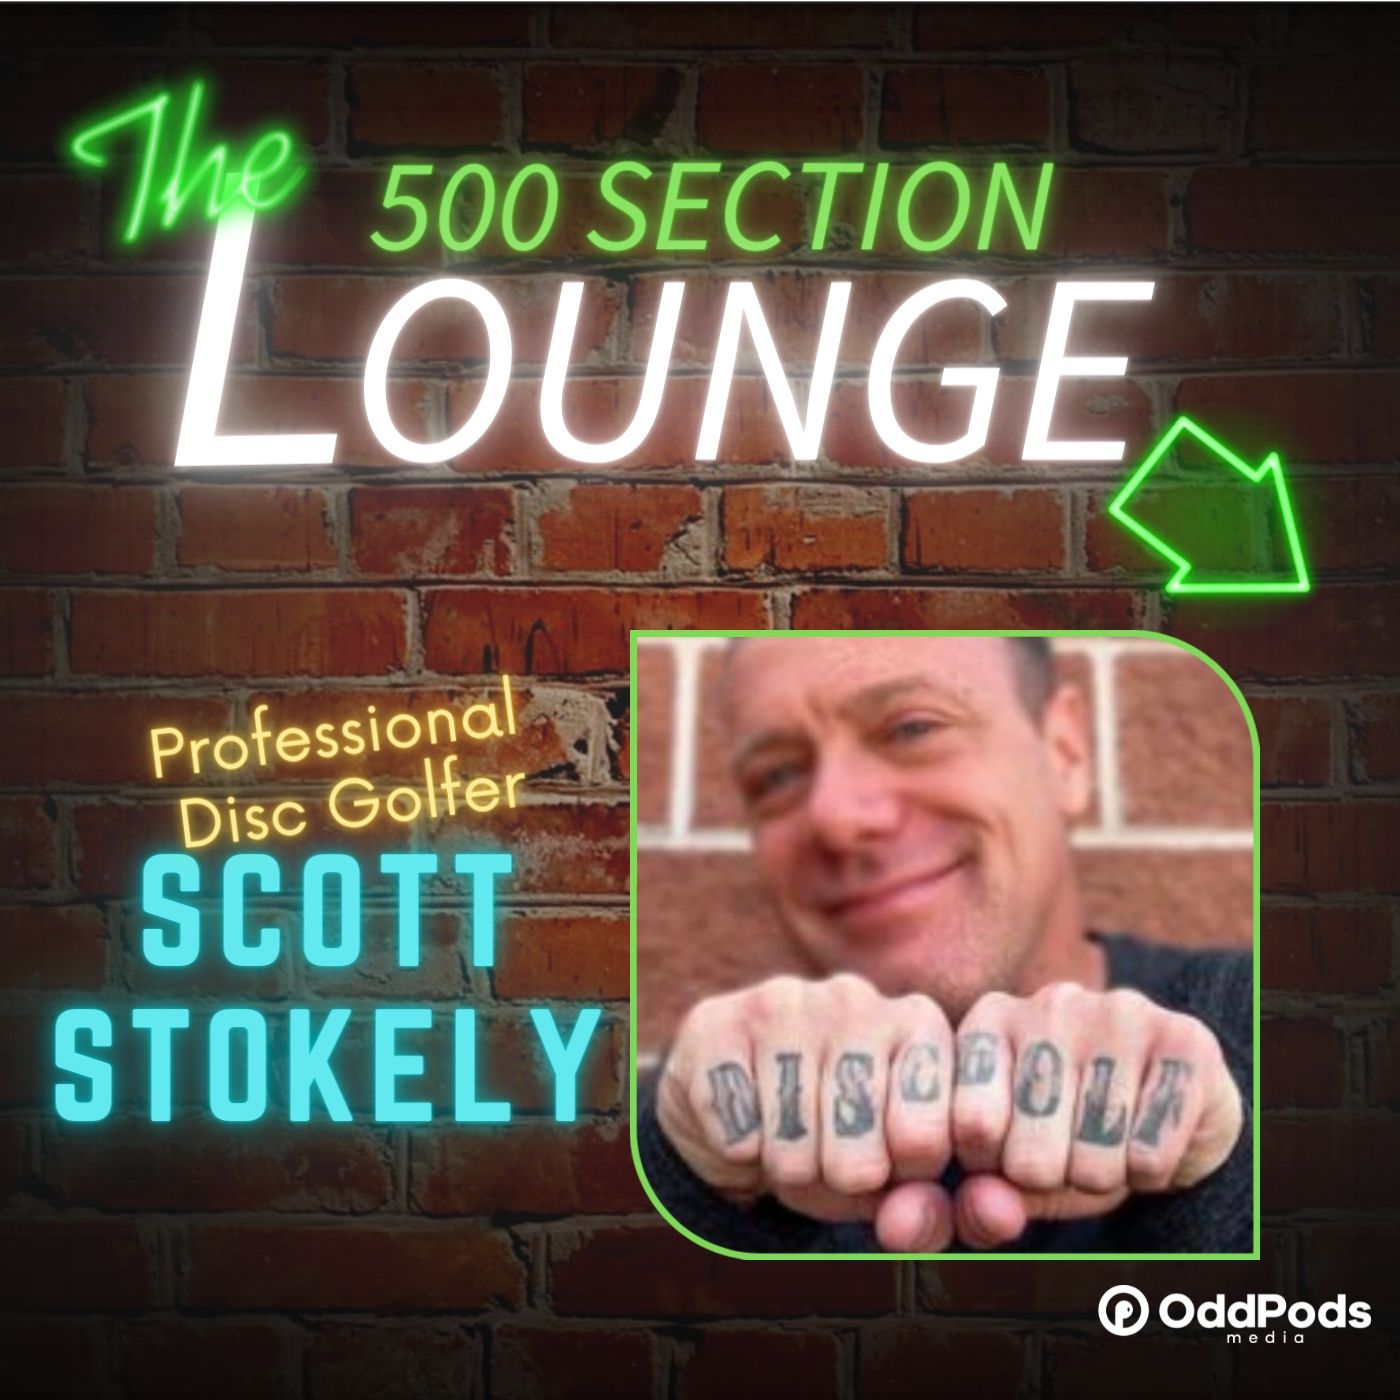 E90: The Lounge DISCovers Scott Stokely!